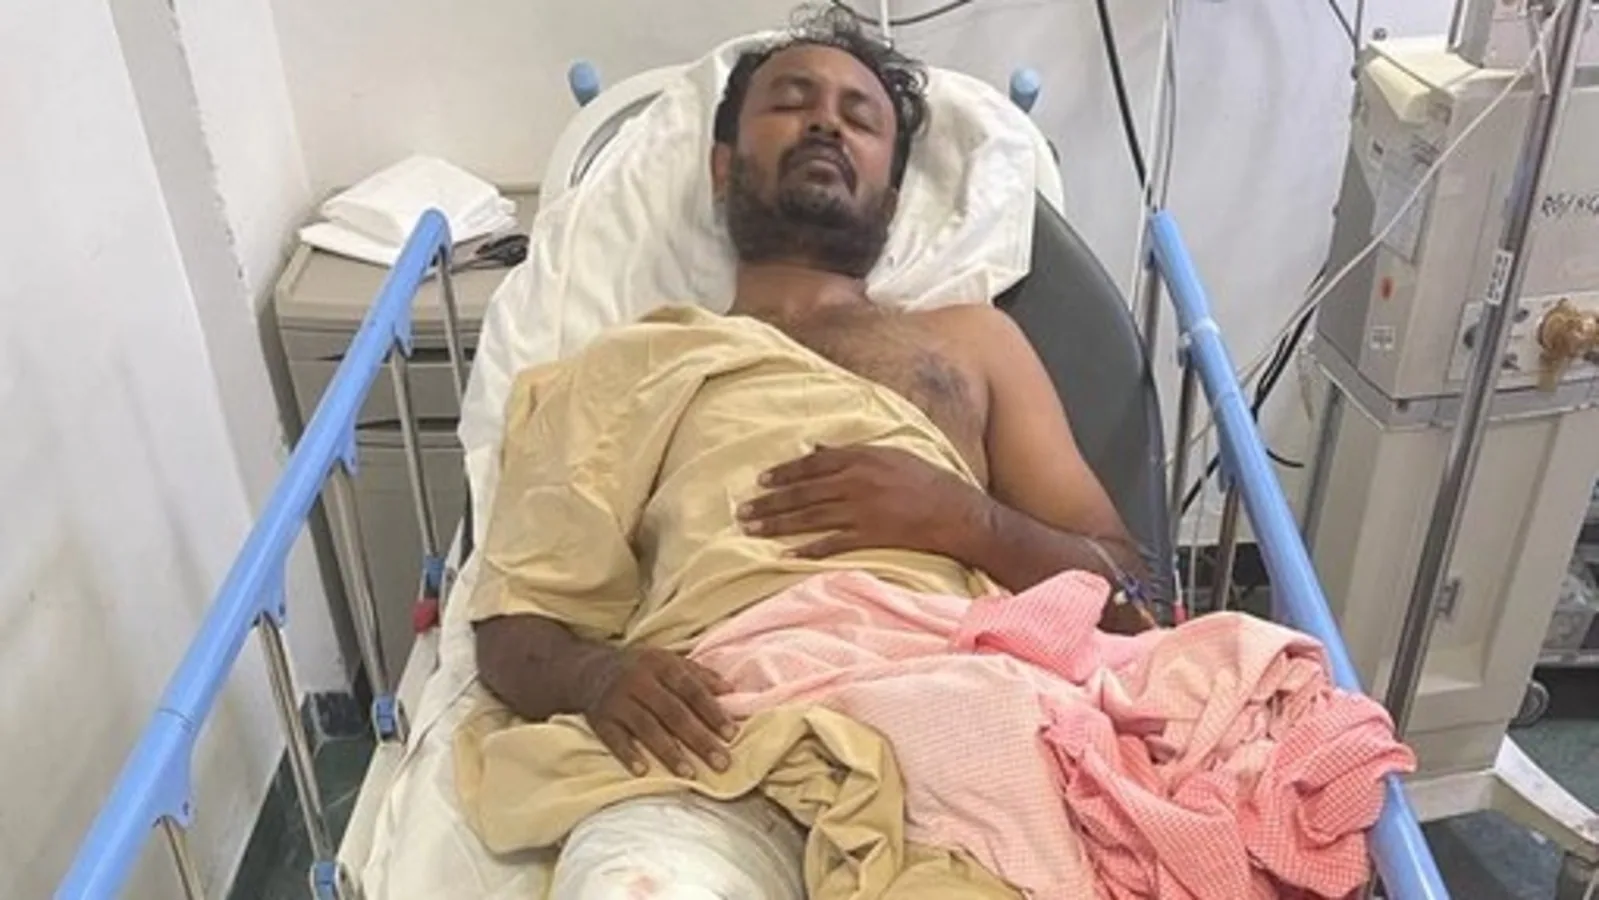 Bengaluru acid attack accused tried to escape, was shot in the leg by police